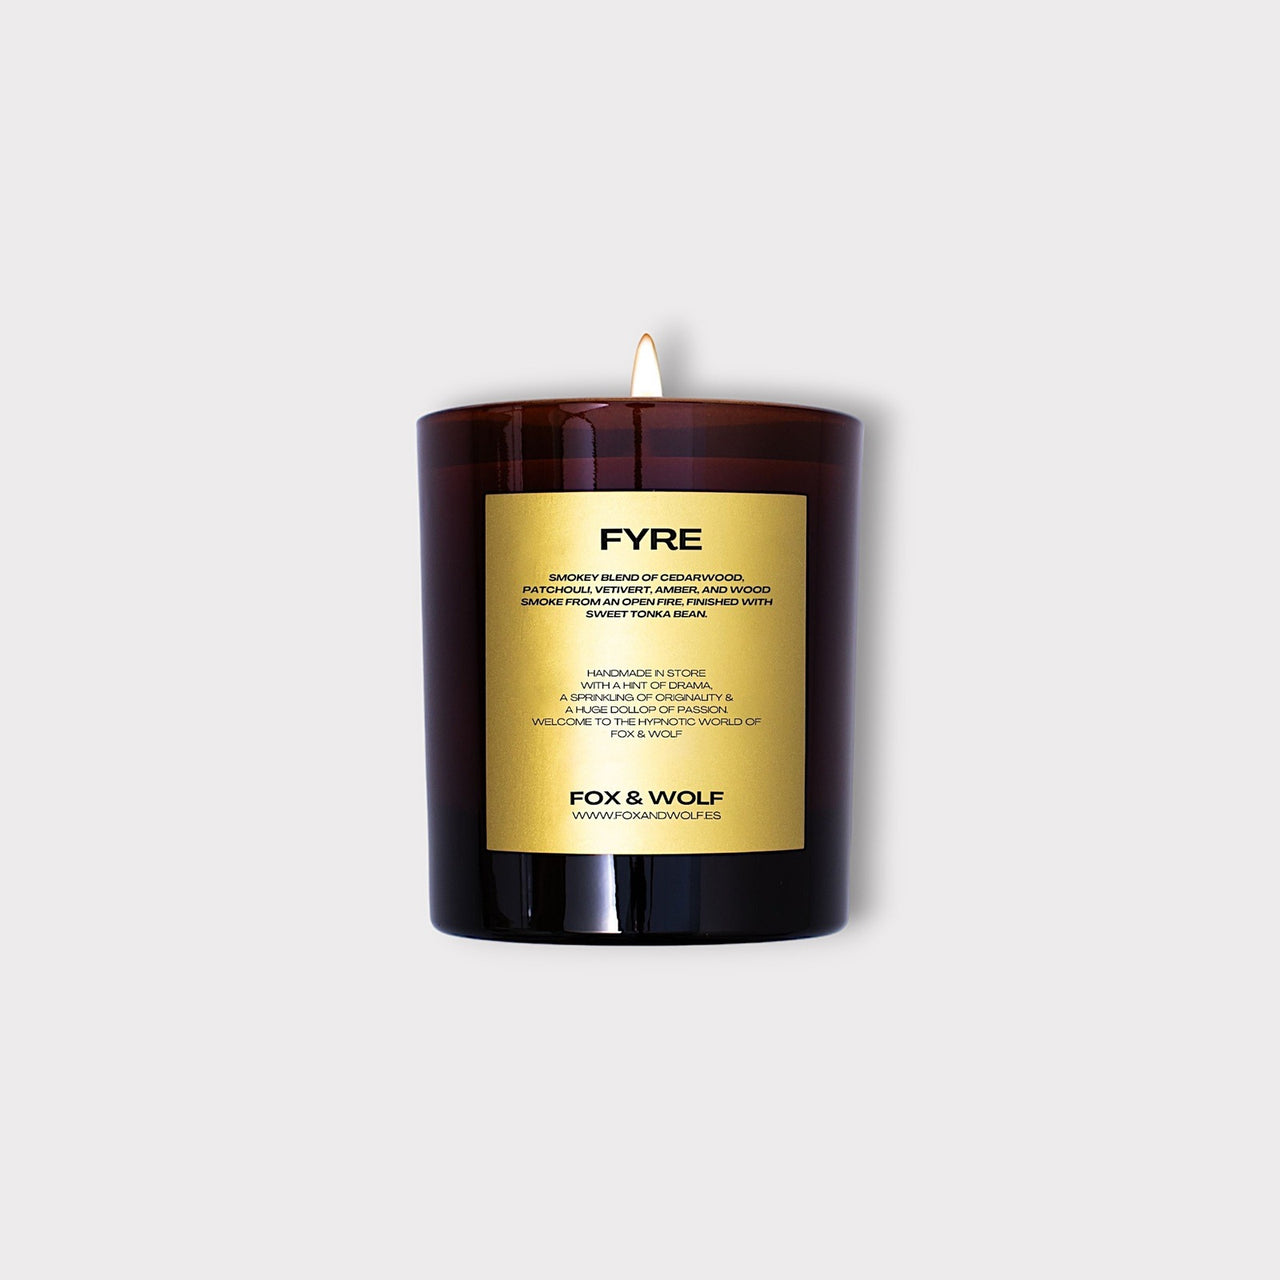 300 G FYRE SCENTED CANDLE